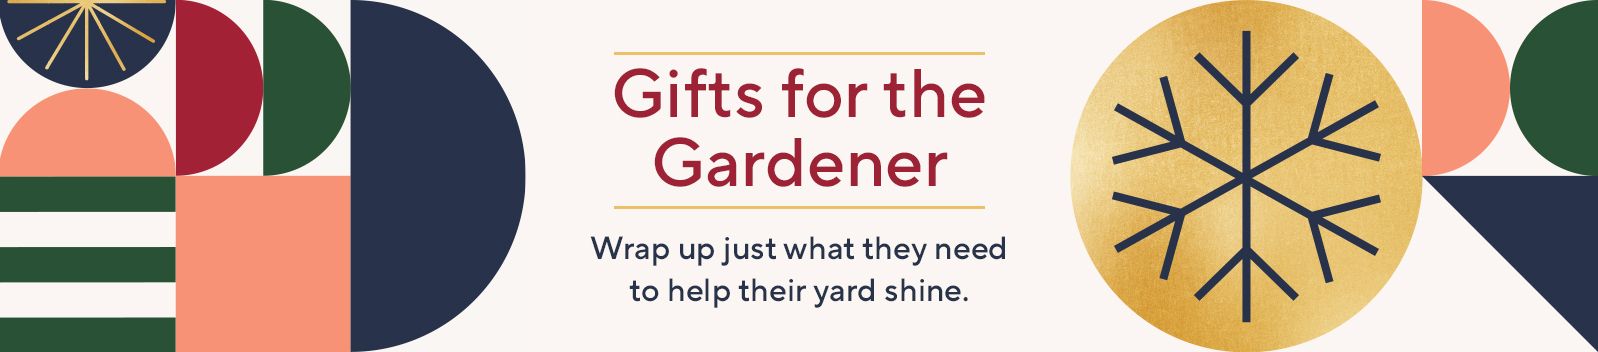 Gifts for the Gardener - Wrap up just what they need to help their yard shine. 